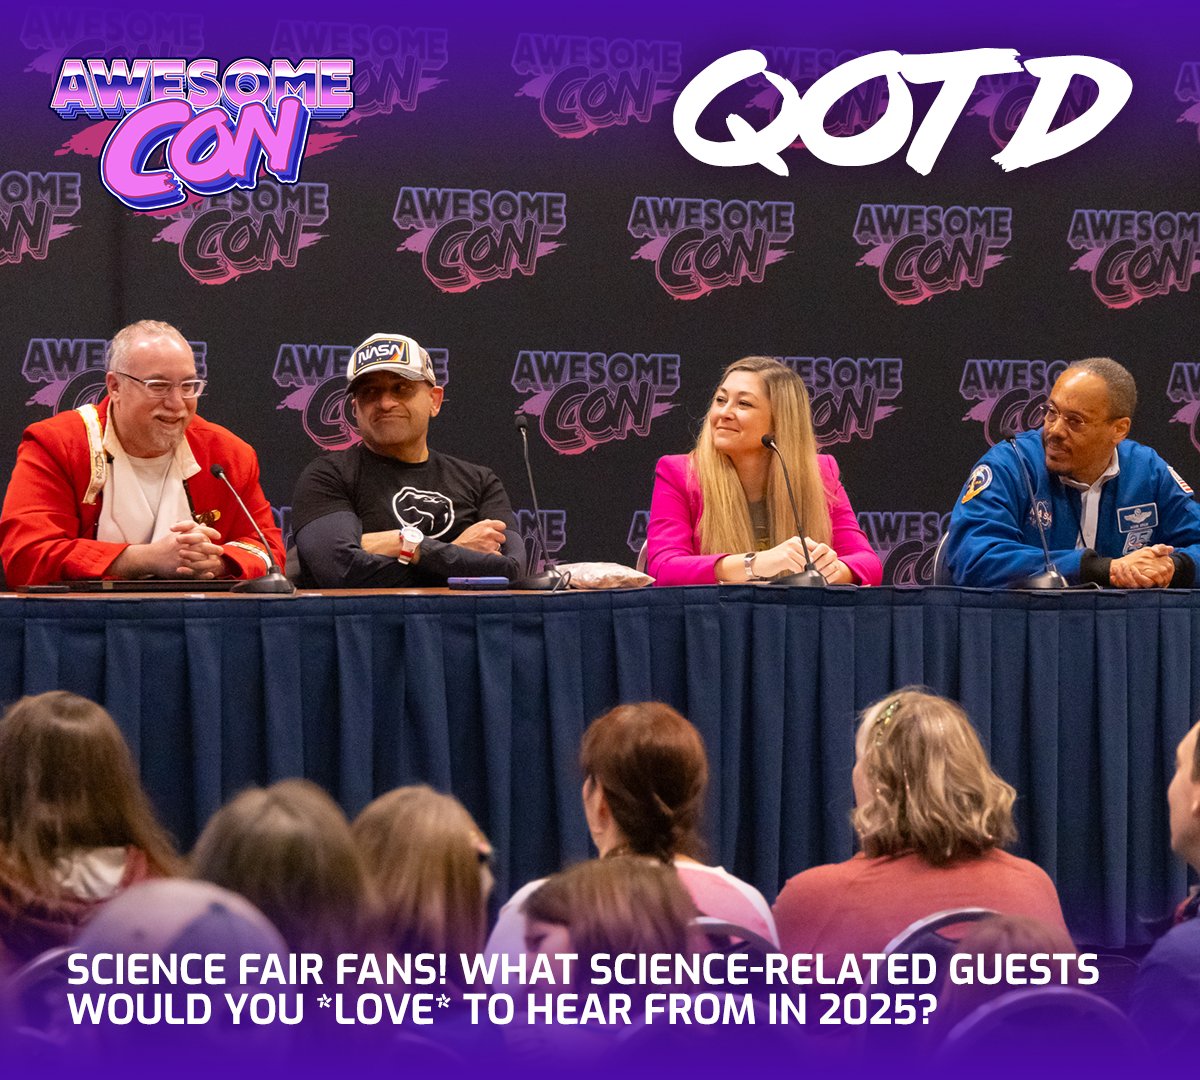 ❓ QOTD - Science Fair Fans! What Science Fair-related guests would you ✨LOVE✨ to hear from in 2025? #ScienceFair